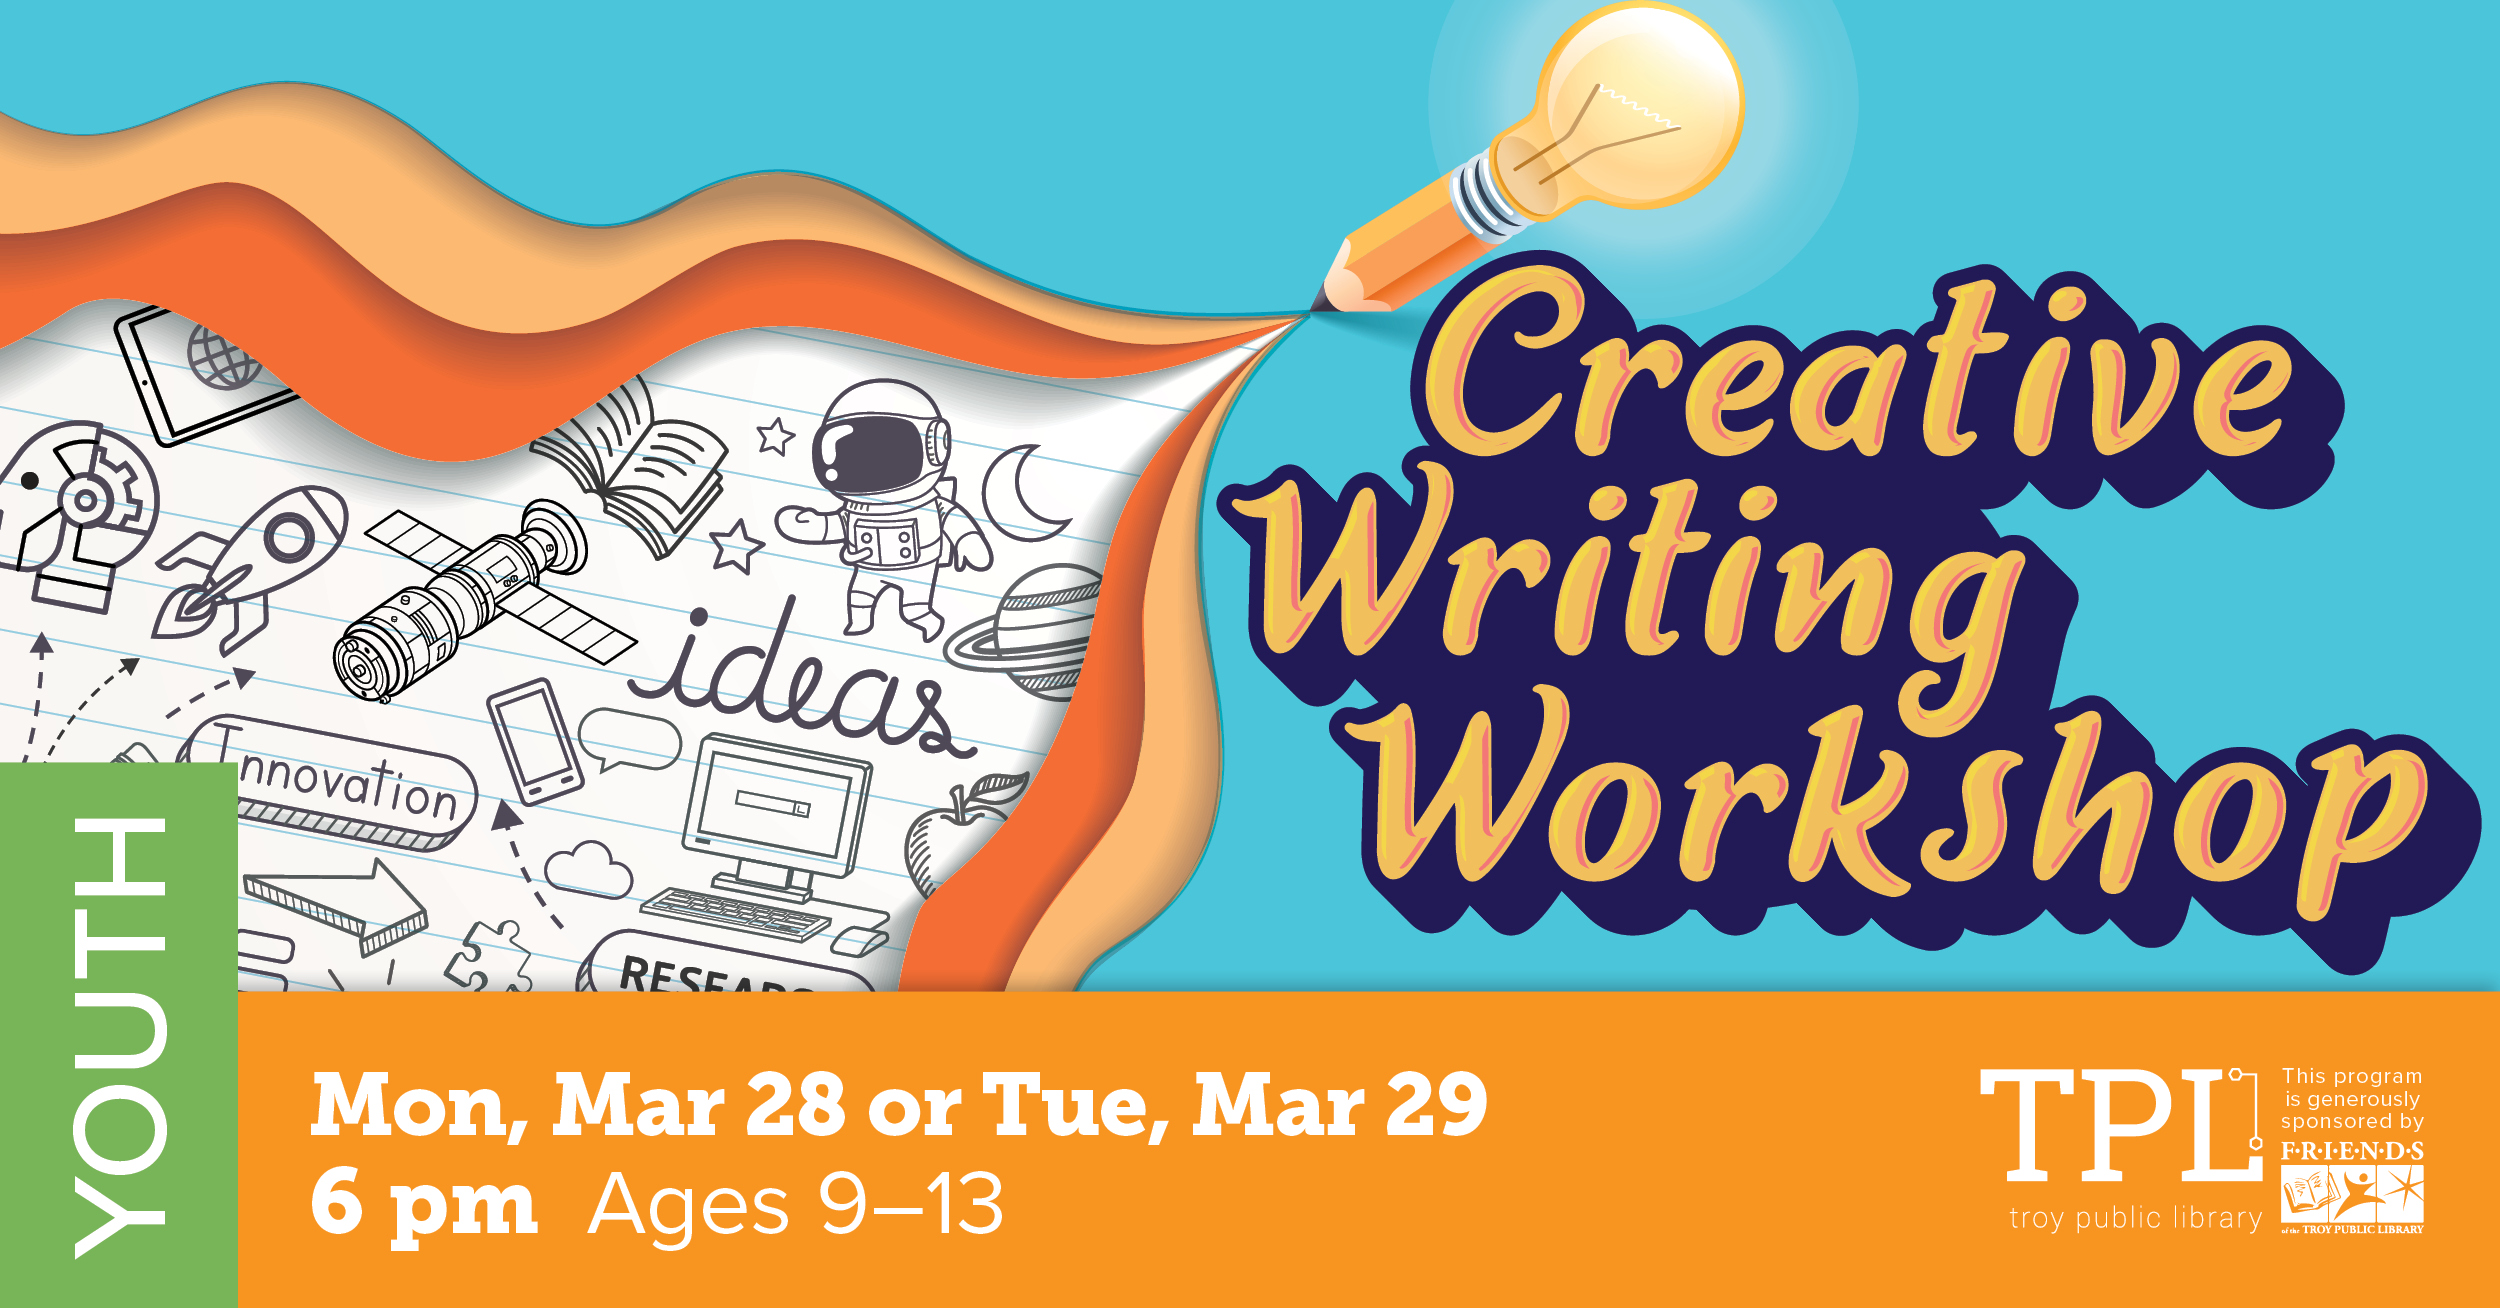 Creative Writing Workshop. Monday, March 28 or Tuesday, March 29 at 6pm. Ages 9-13. Sponsored by the Friends of the Troy Public Library